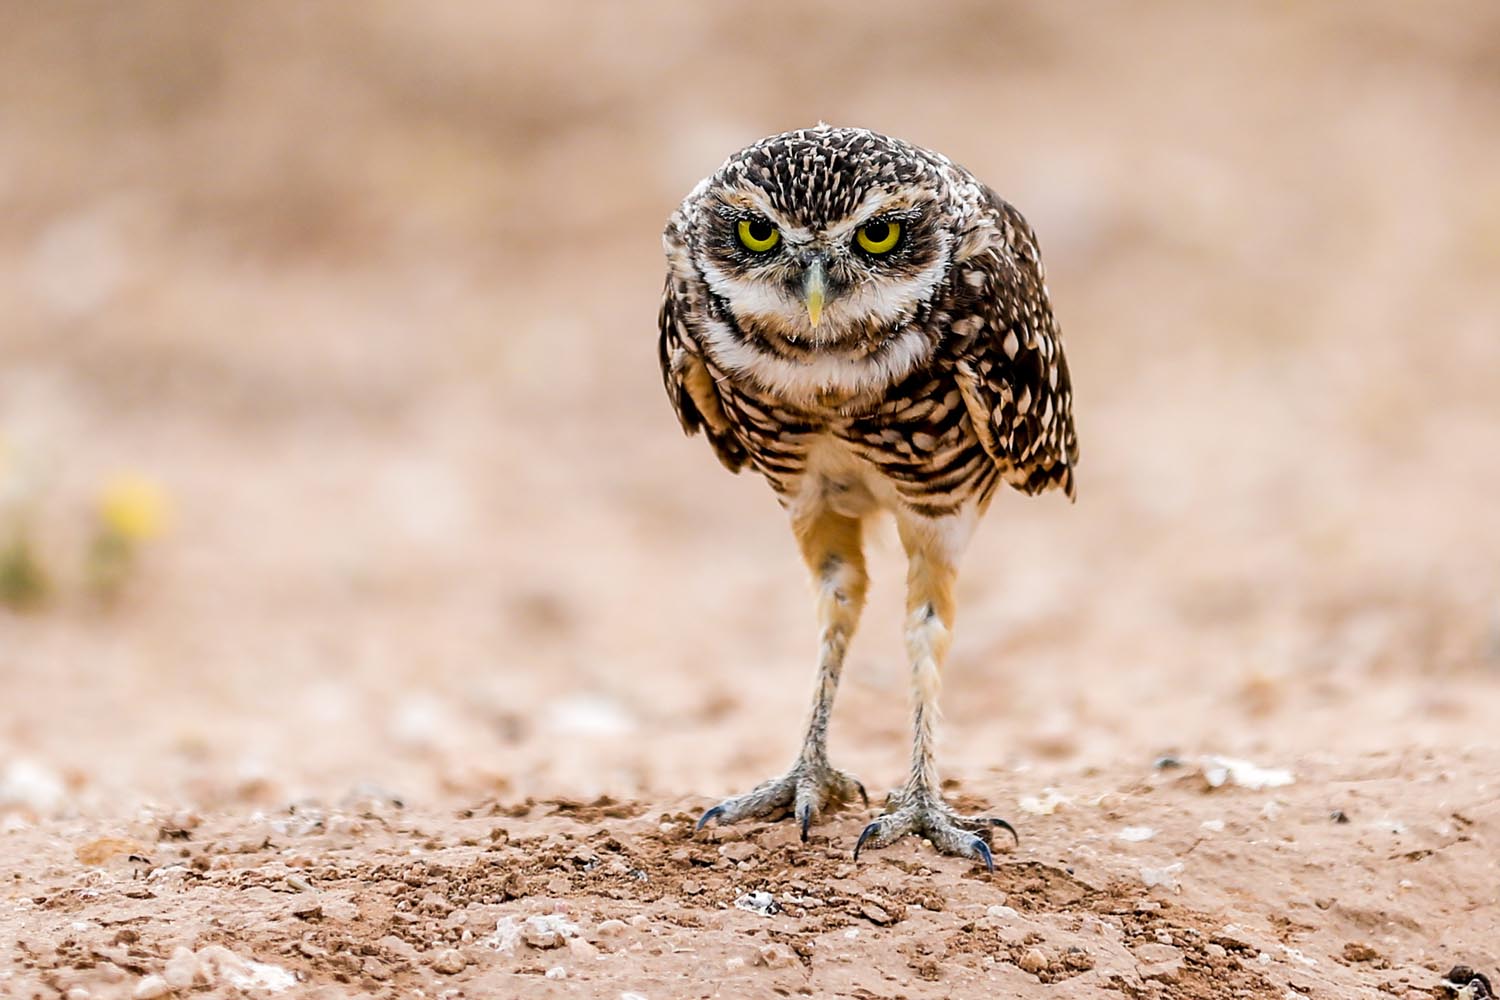 Heather Eaton: The Glare of a Burrowing Owl - West Texas (Lubbock)